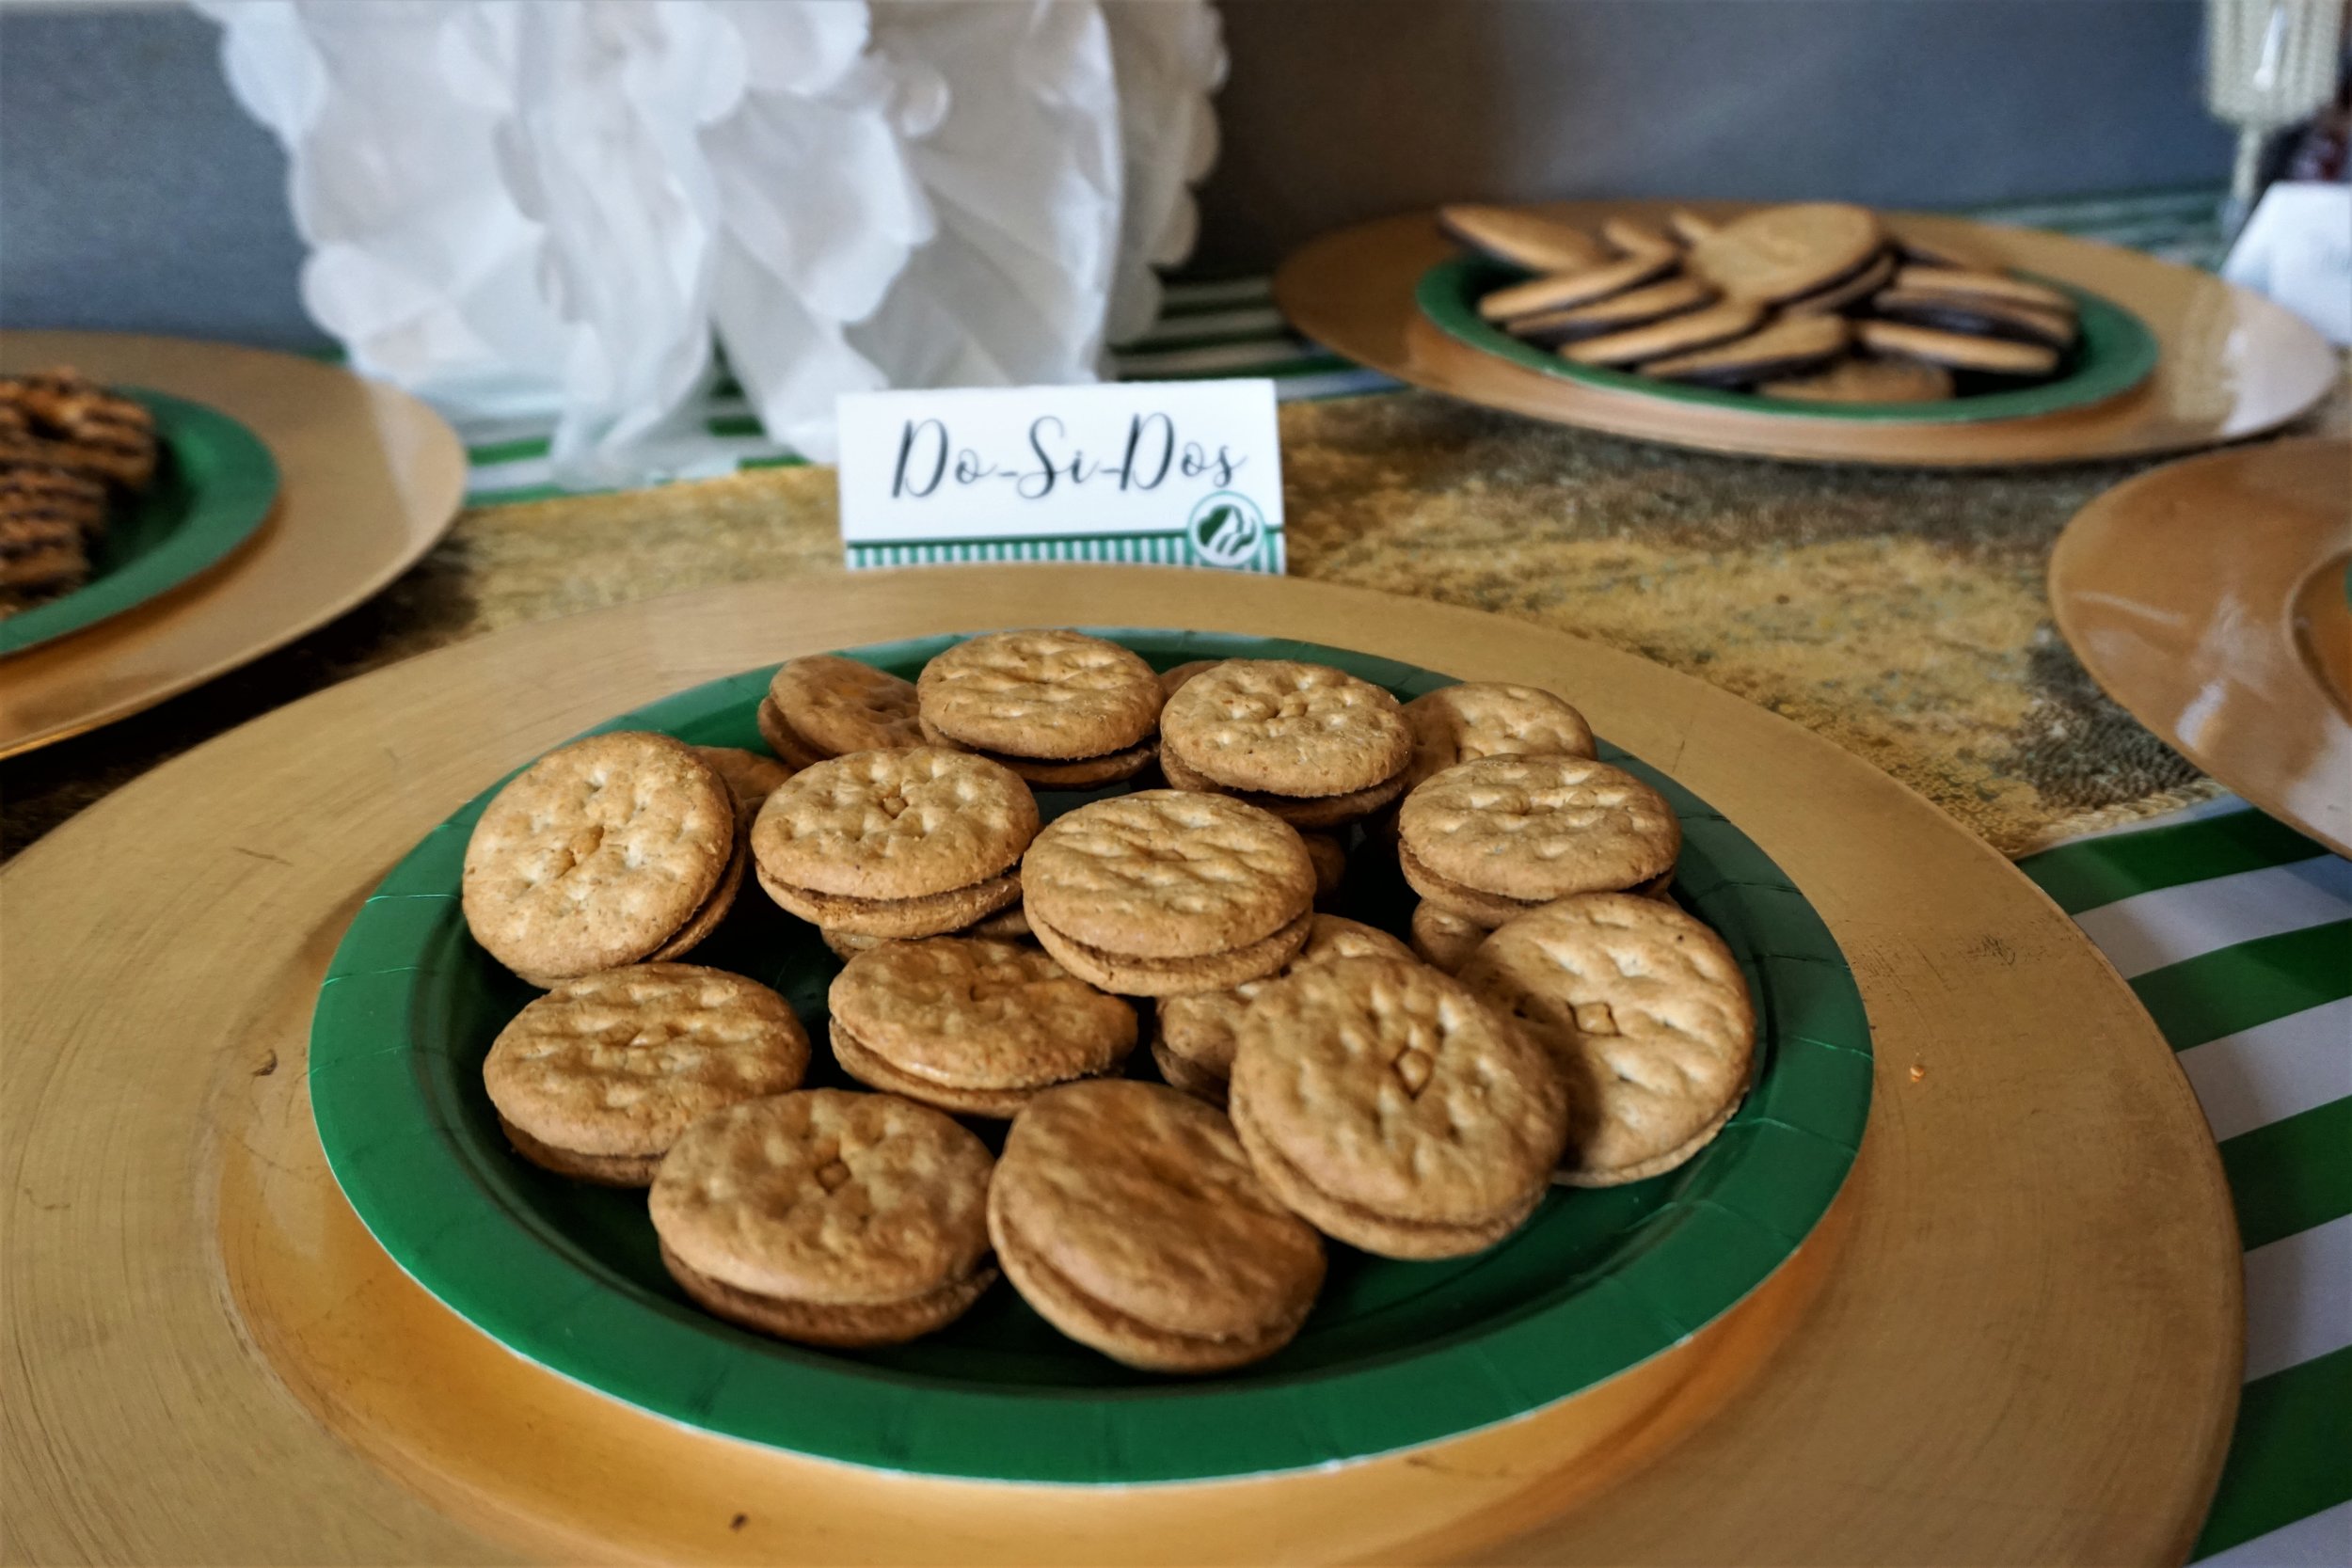  Do-si-dos served as part of a Girl Scout cookie and wine pairing party! 